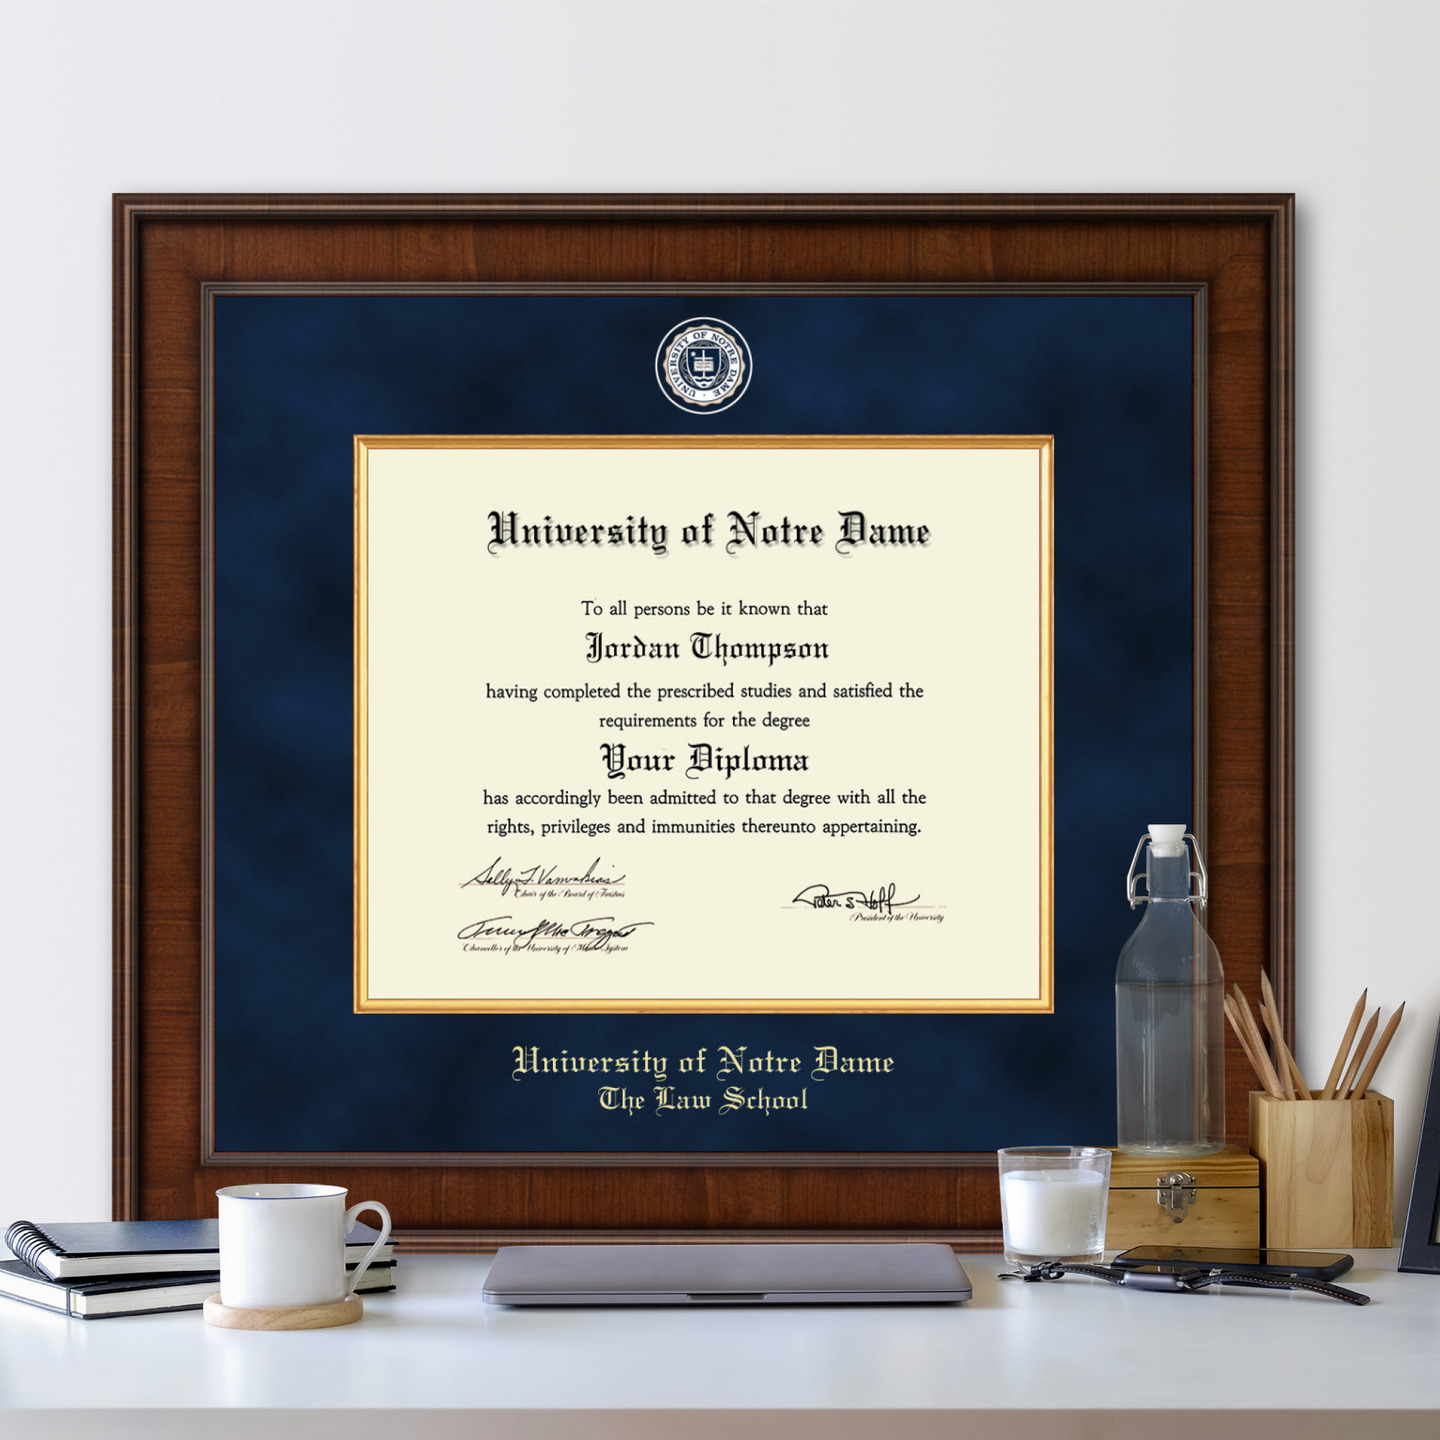 University of Notre Dame Presidential Masterpiece Diploma Frame in